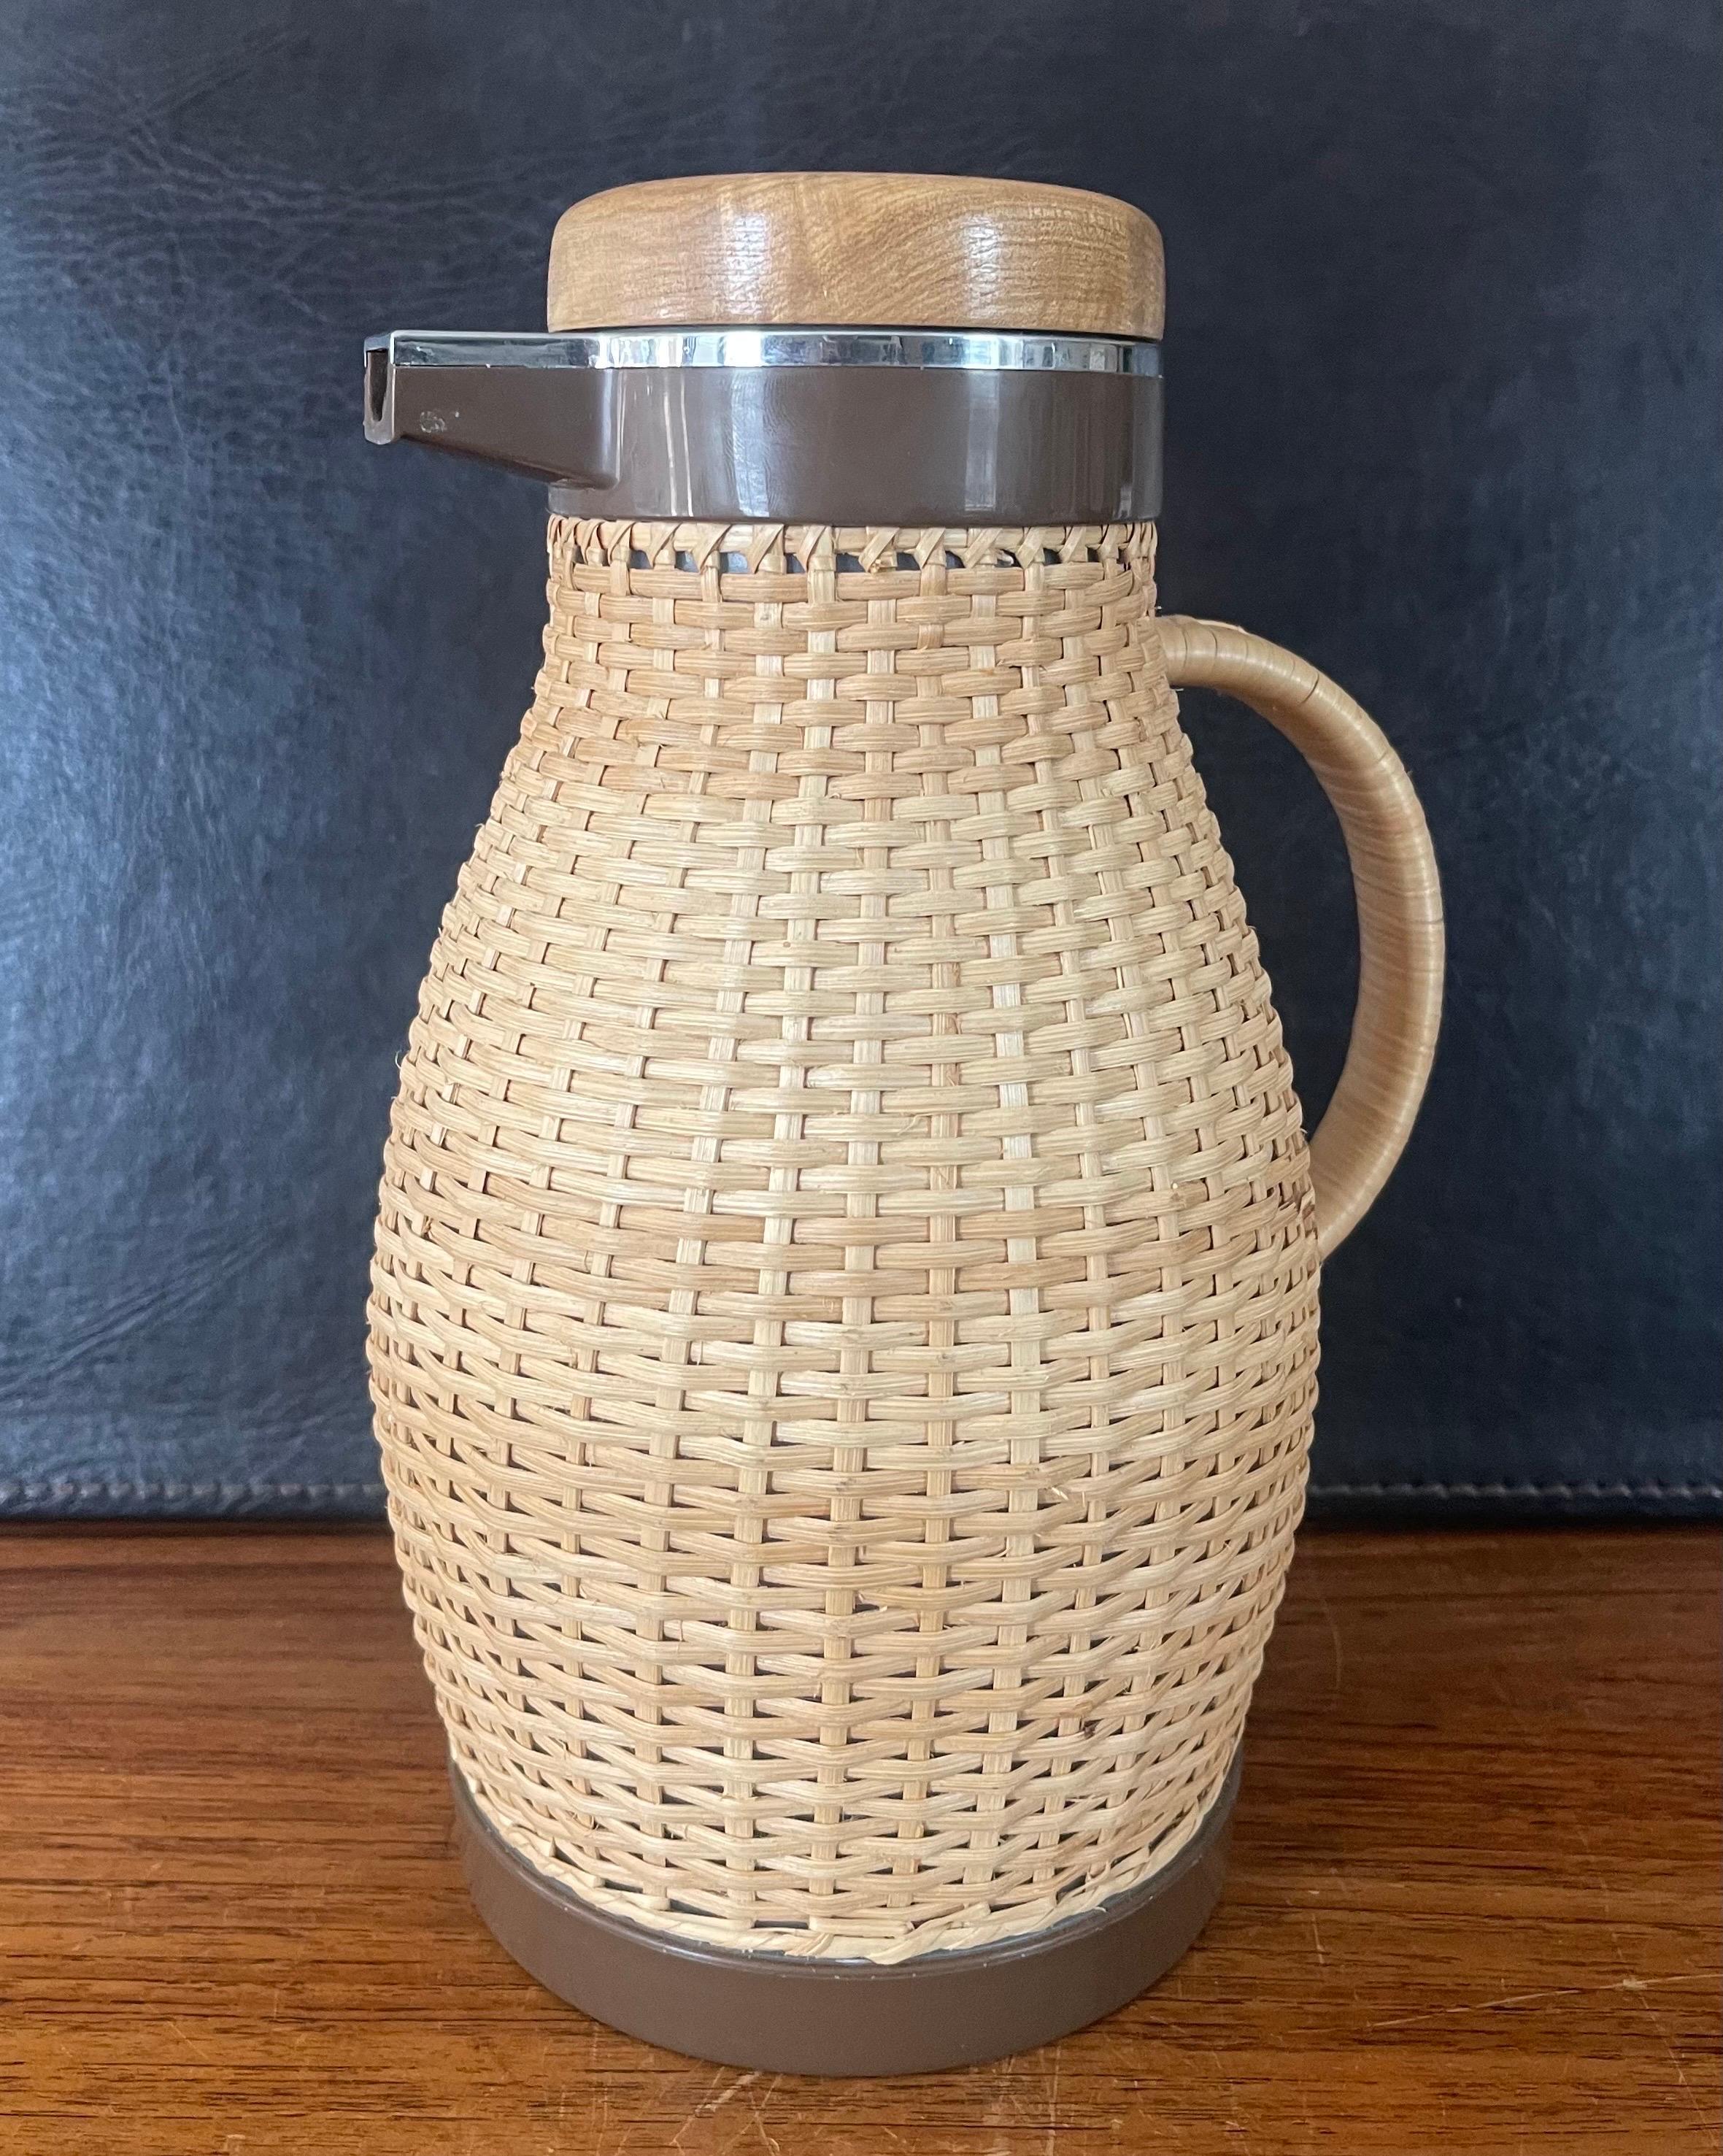 A MCM wicker wrapped thermos coffee carafe / pitcher by Corning Designs, circa 1970s. The piece is in good vintage condition and measures 8.5